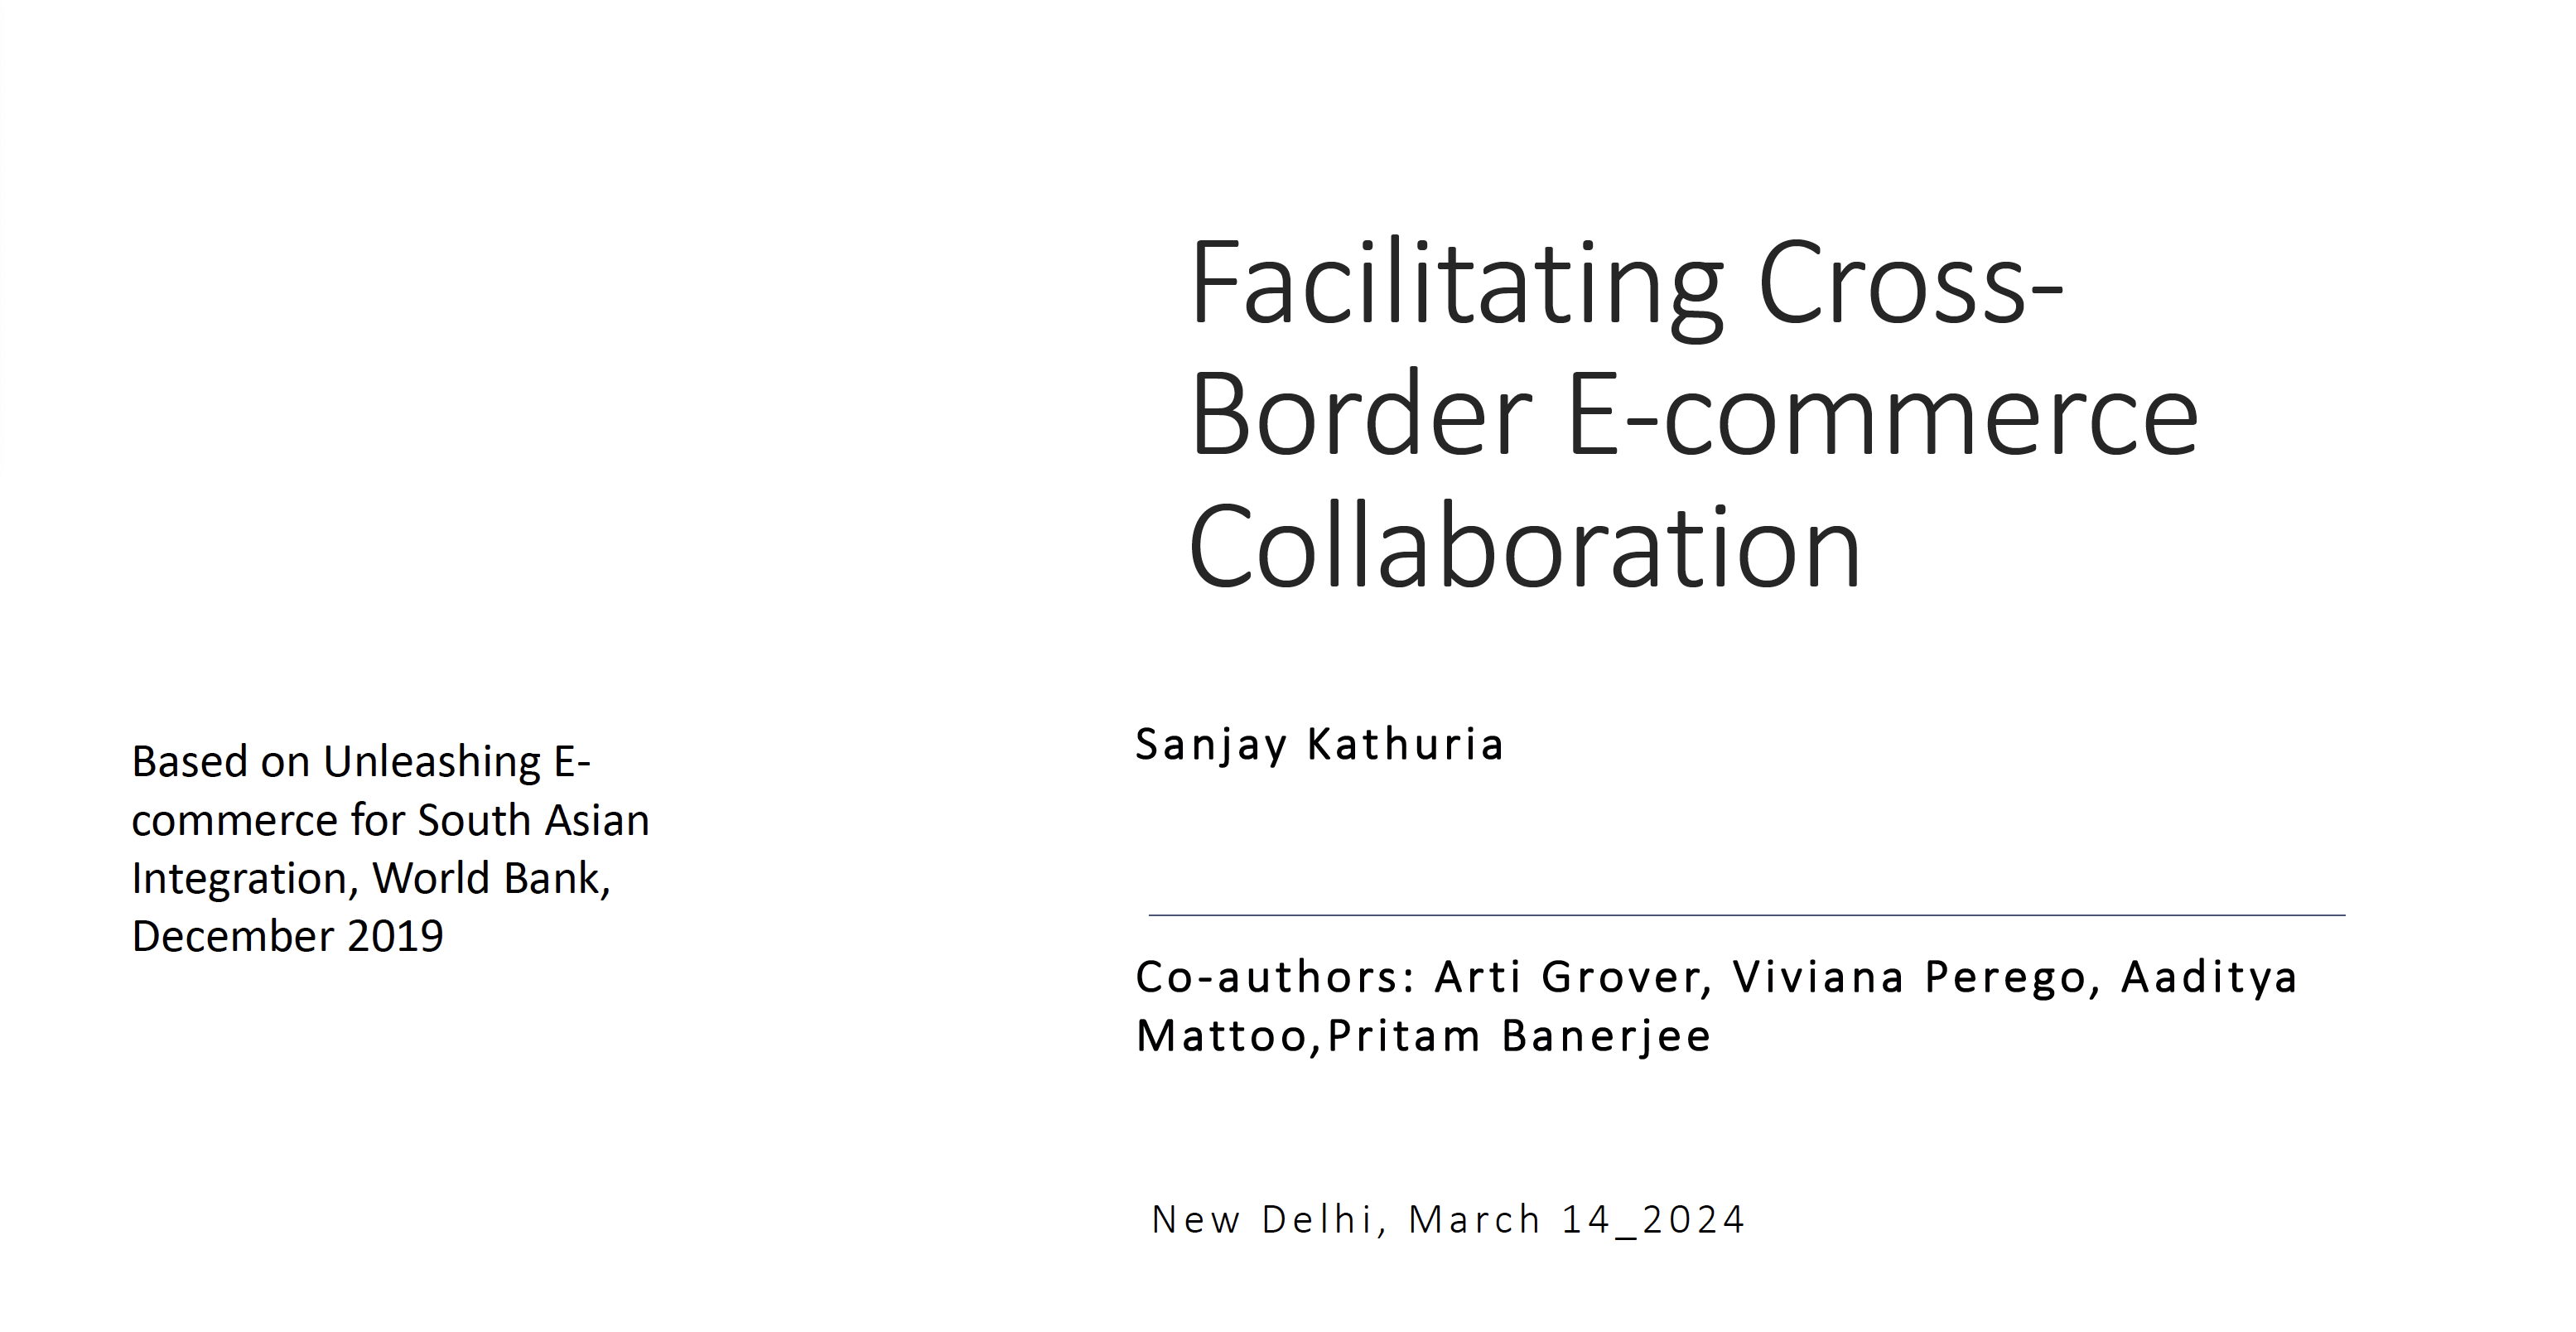 Dr. Sanjay Kathuria, Visiting Senior Fellow, Centre for Social and Economic Progress; Visiting Expert, US Institute of Peace on ‘Facilitating Cross-Border E-Commerce Collaborations’